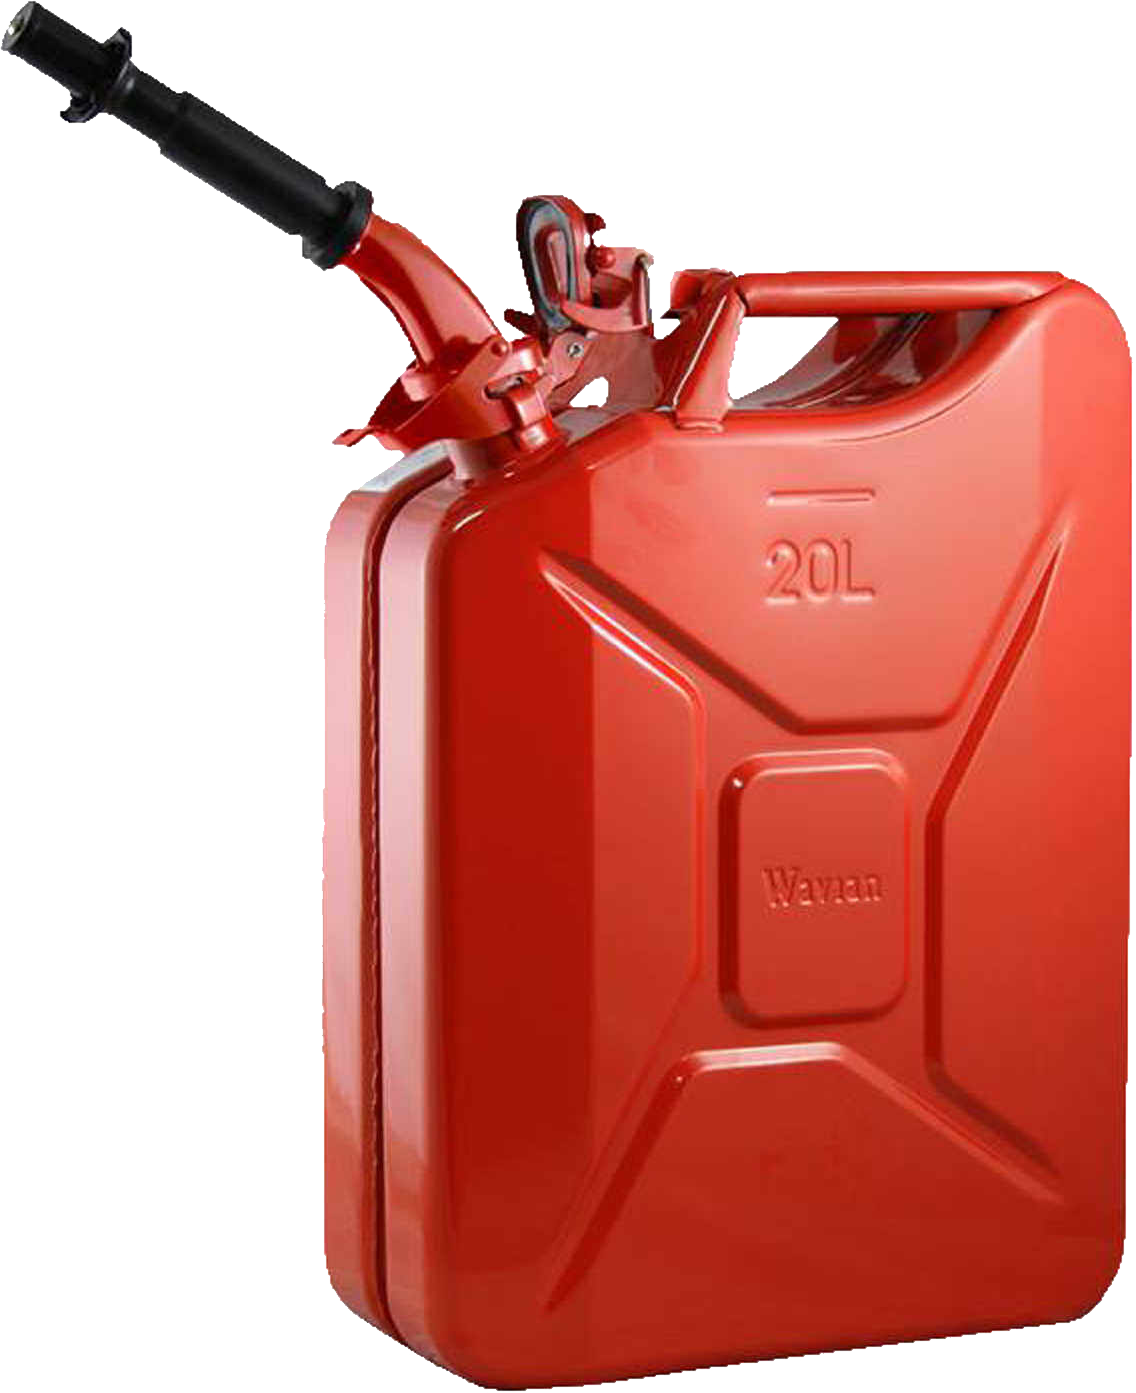 Jerrycan PNG, Jerrycan HD PNG - Free PNG